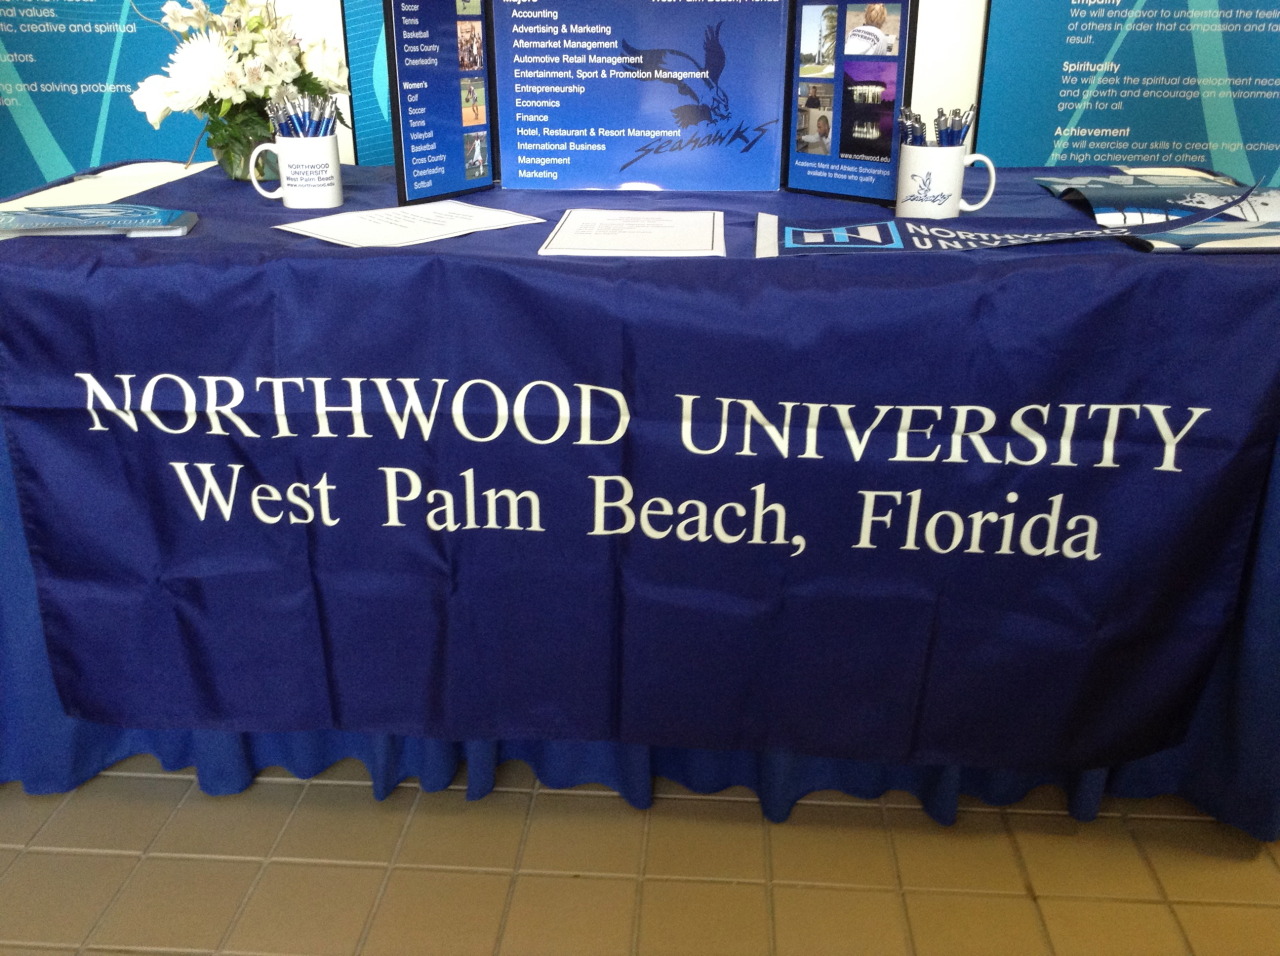 Blanche Tour • Northwood University, located in West Palm Beach,...1280 x 956